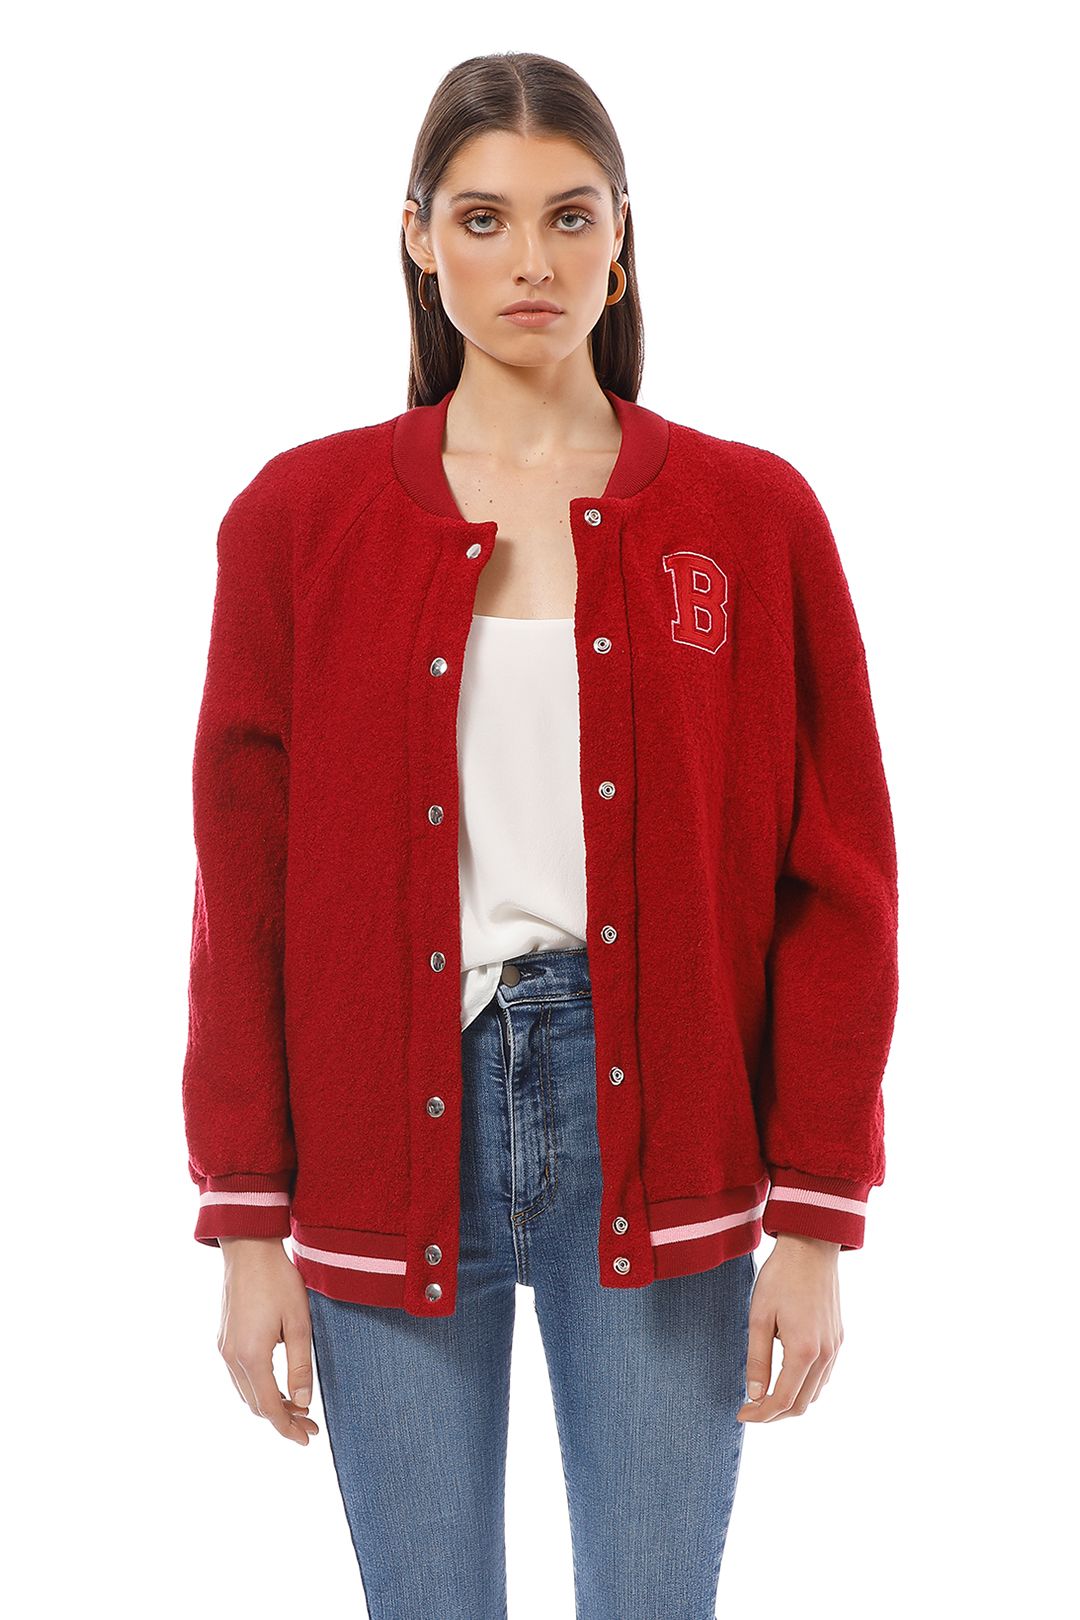 Bec and Bridge - Be Mine Bomber - Red - Front Detail